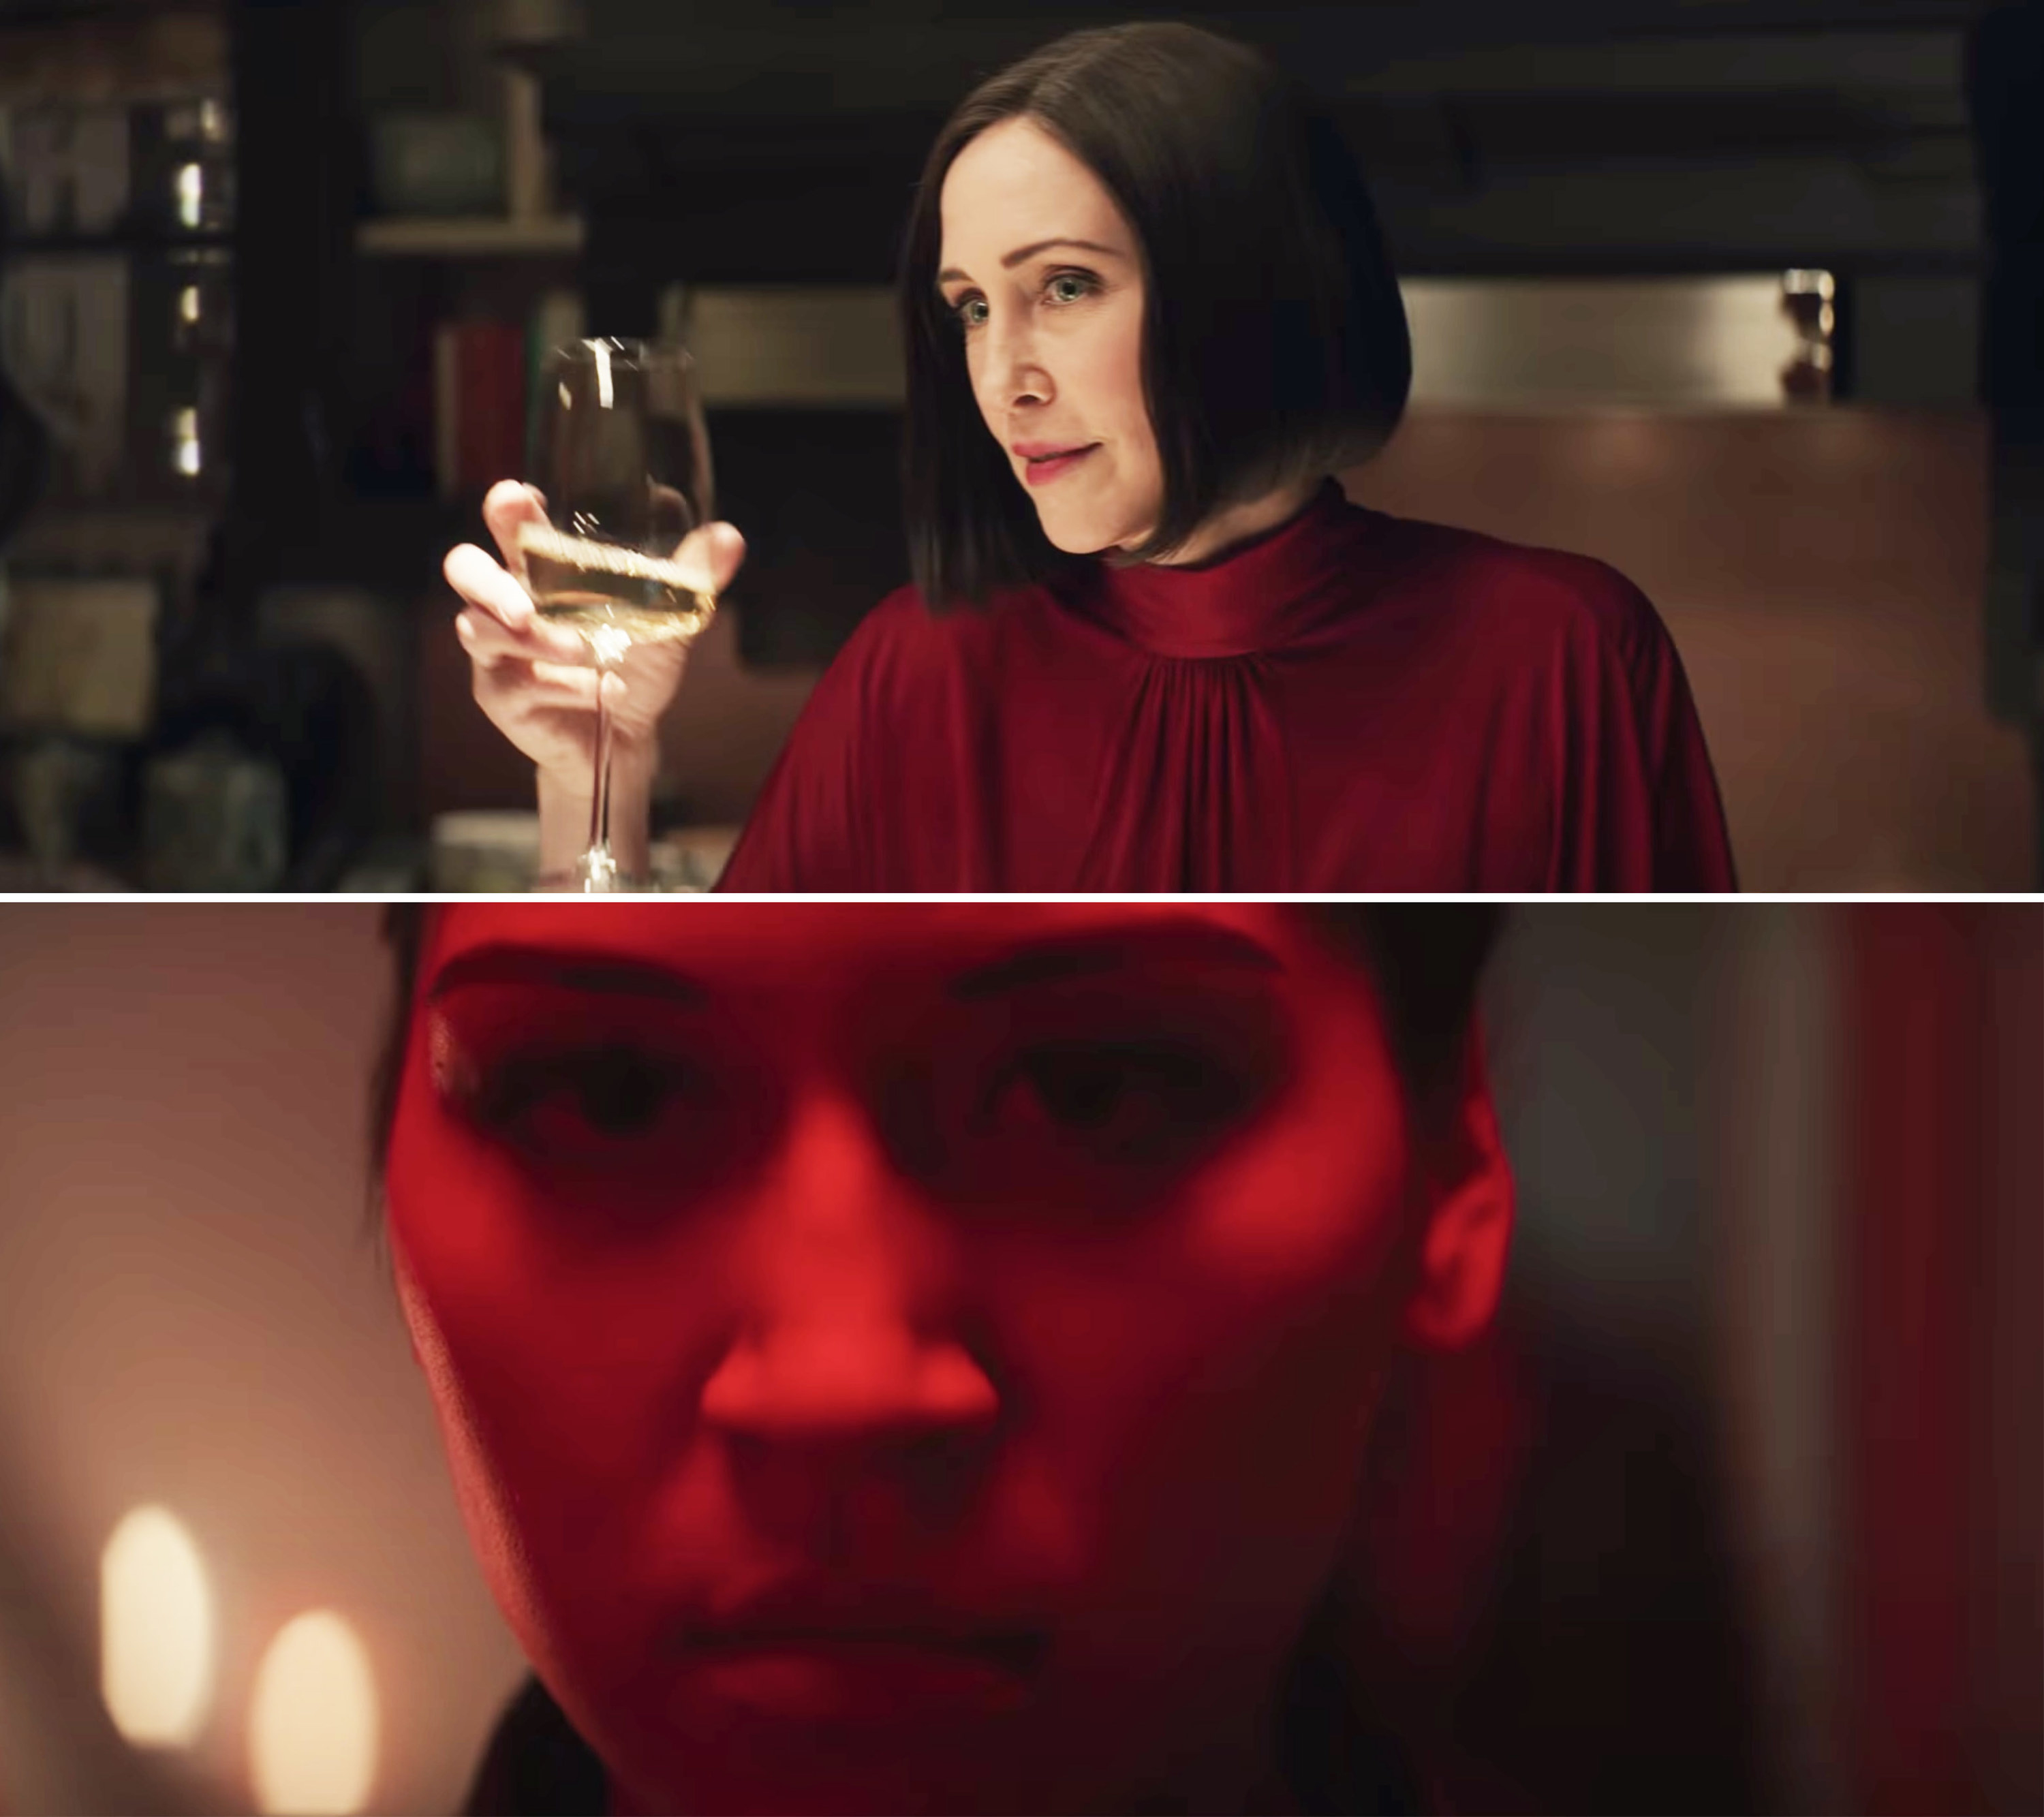 Vera holding a wine glass and Maya in close-up with red light